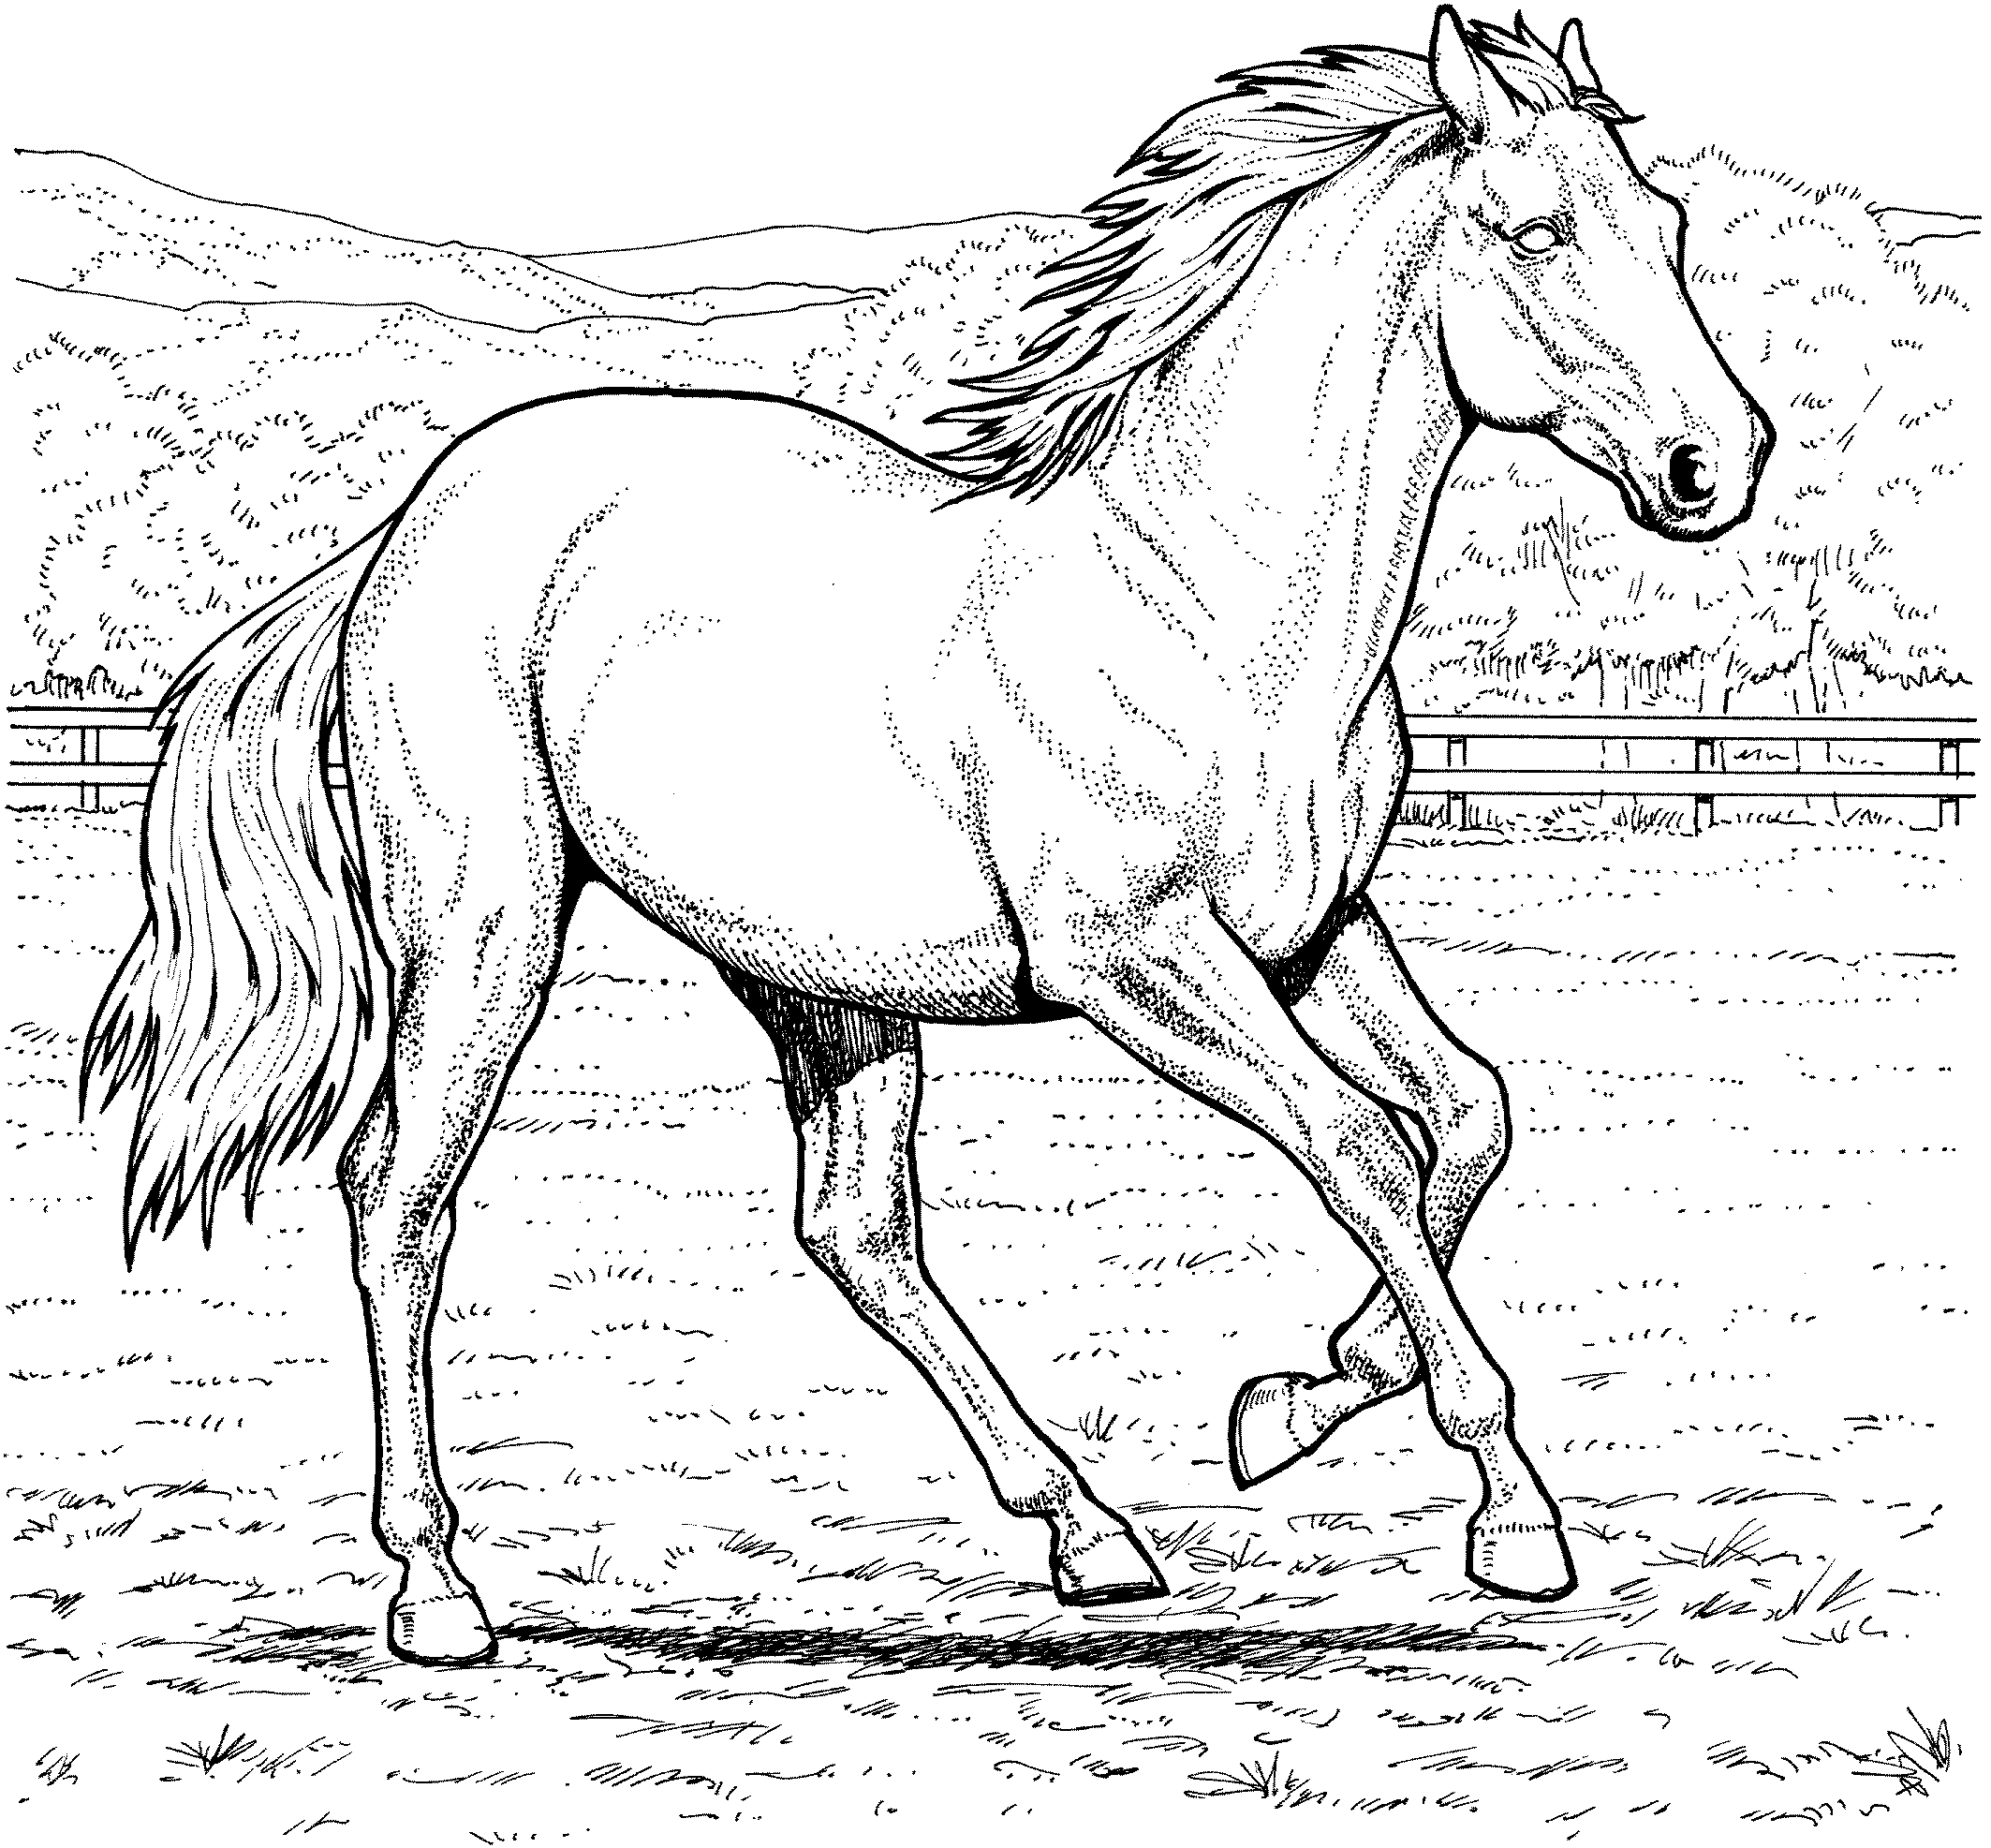 Galloping Horse Coloring Page